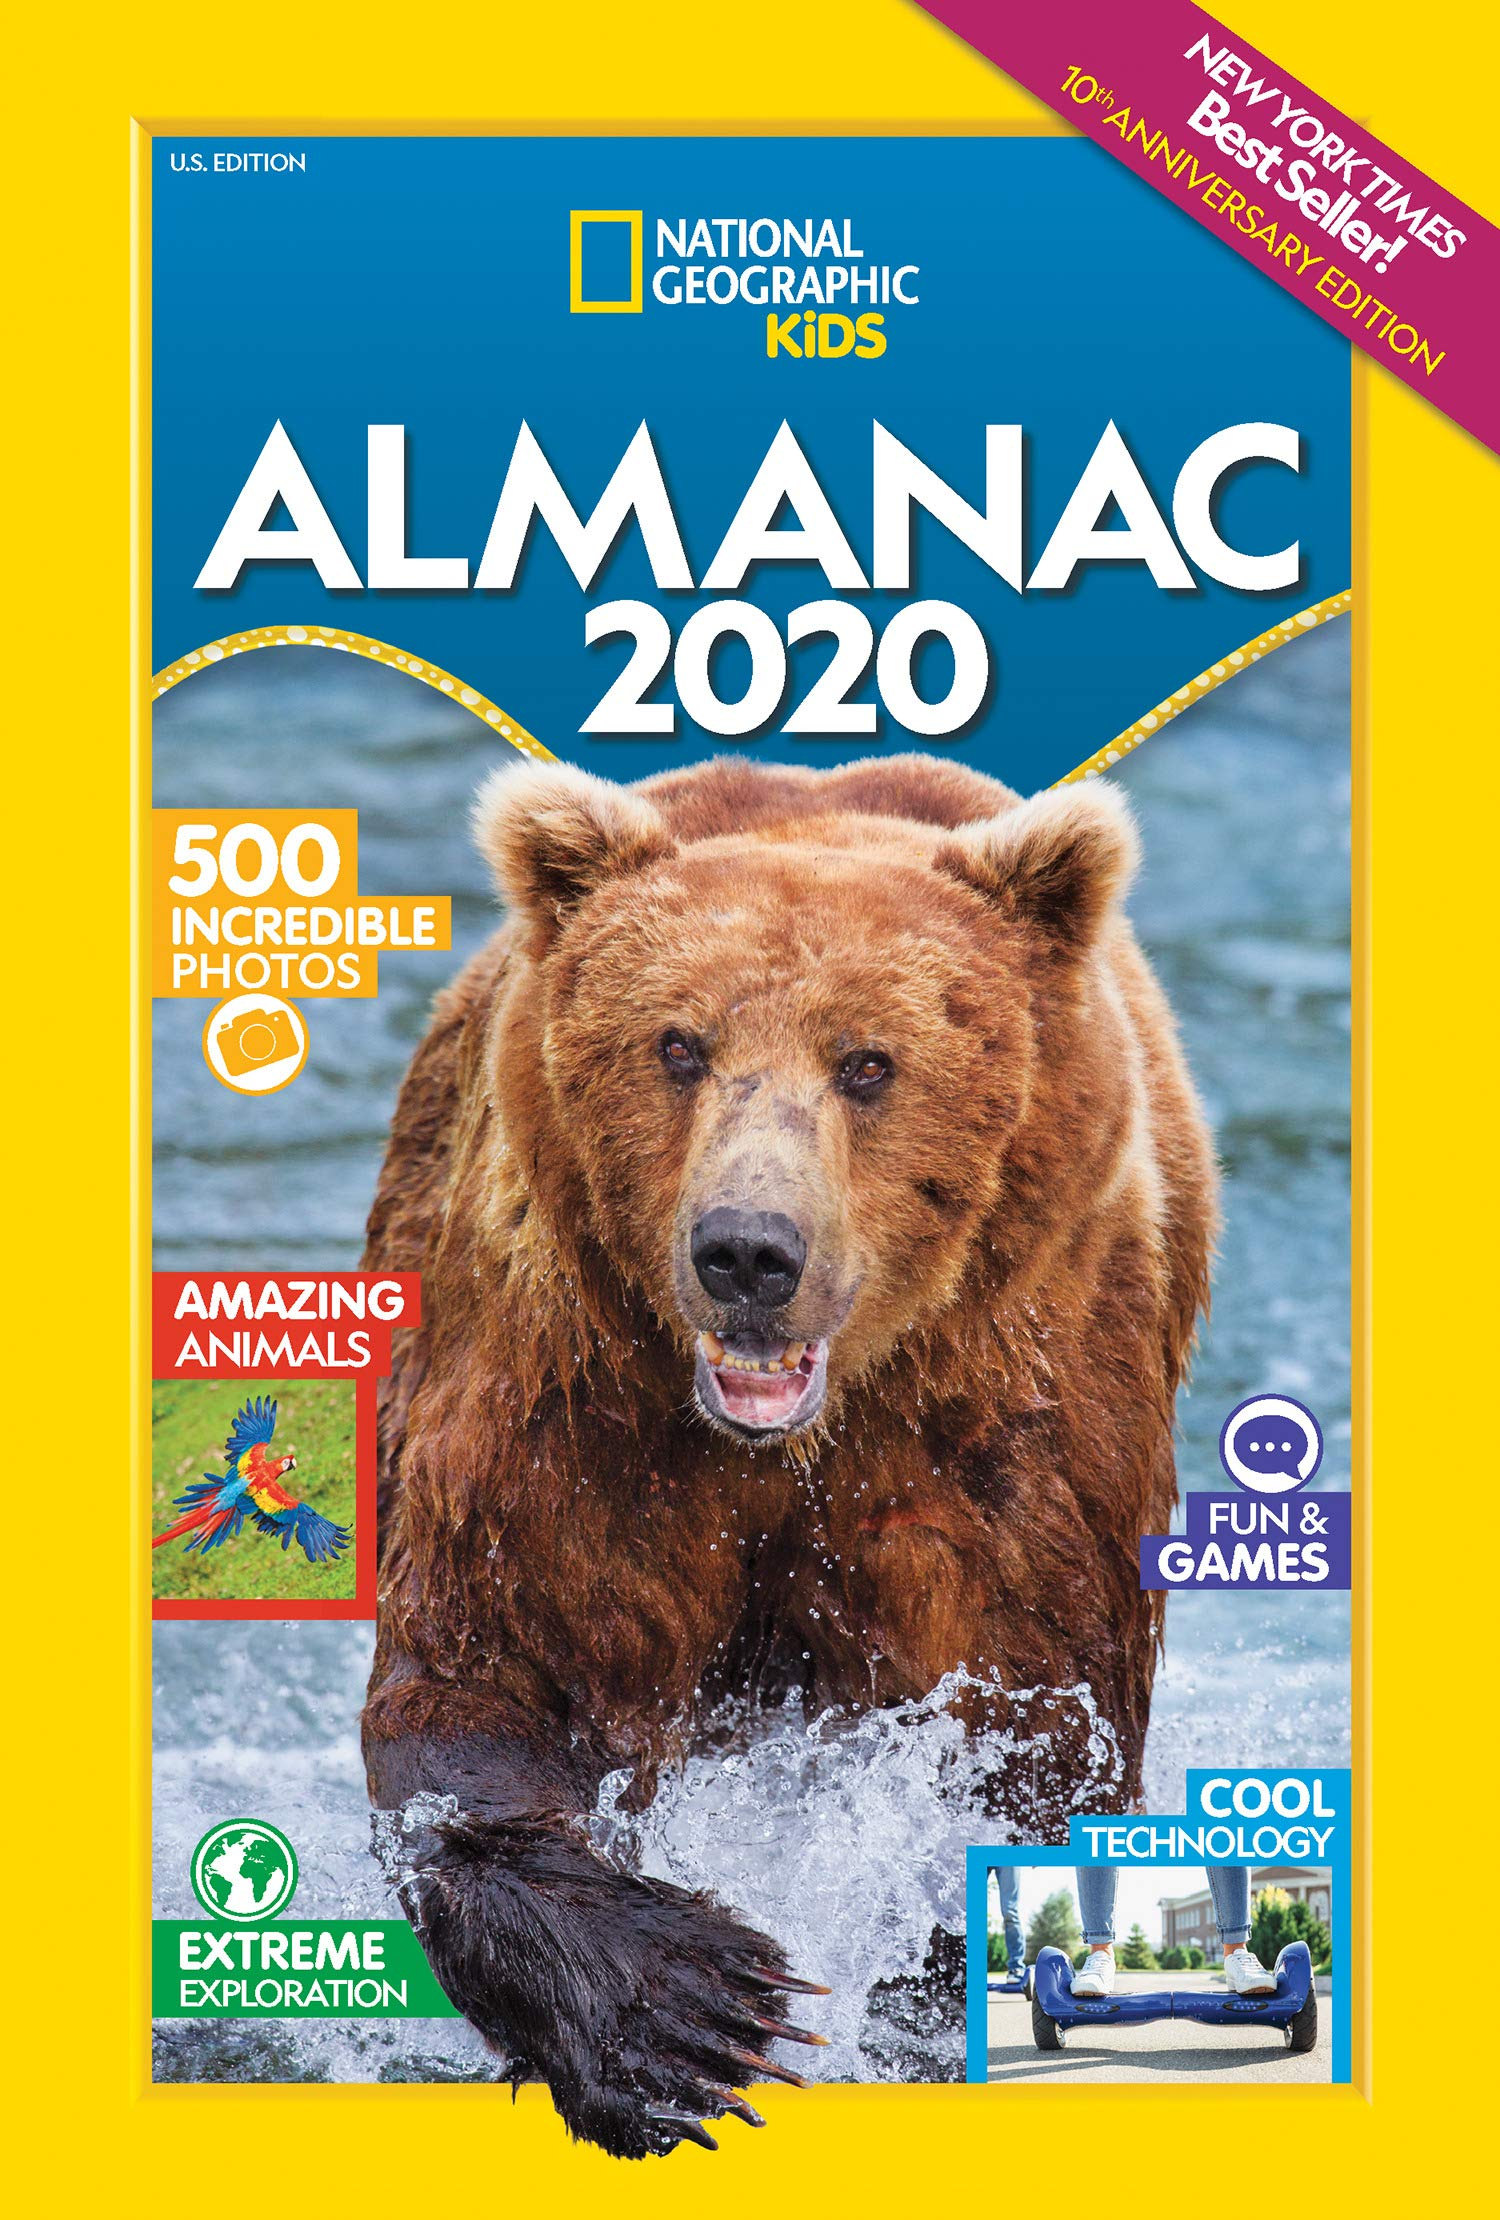 Book Review National Geographic Kids Almanac 2020